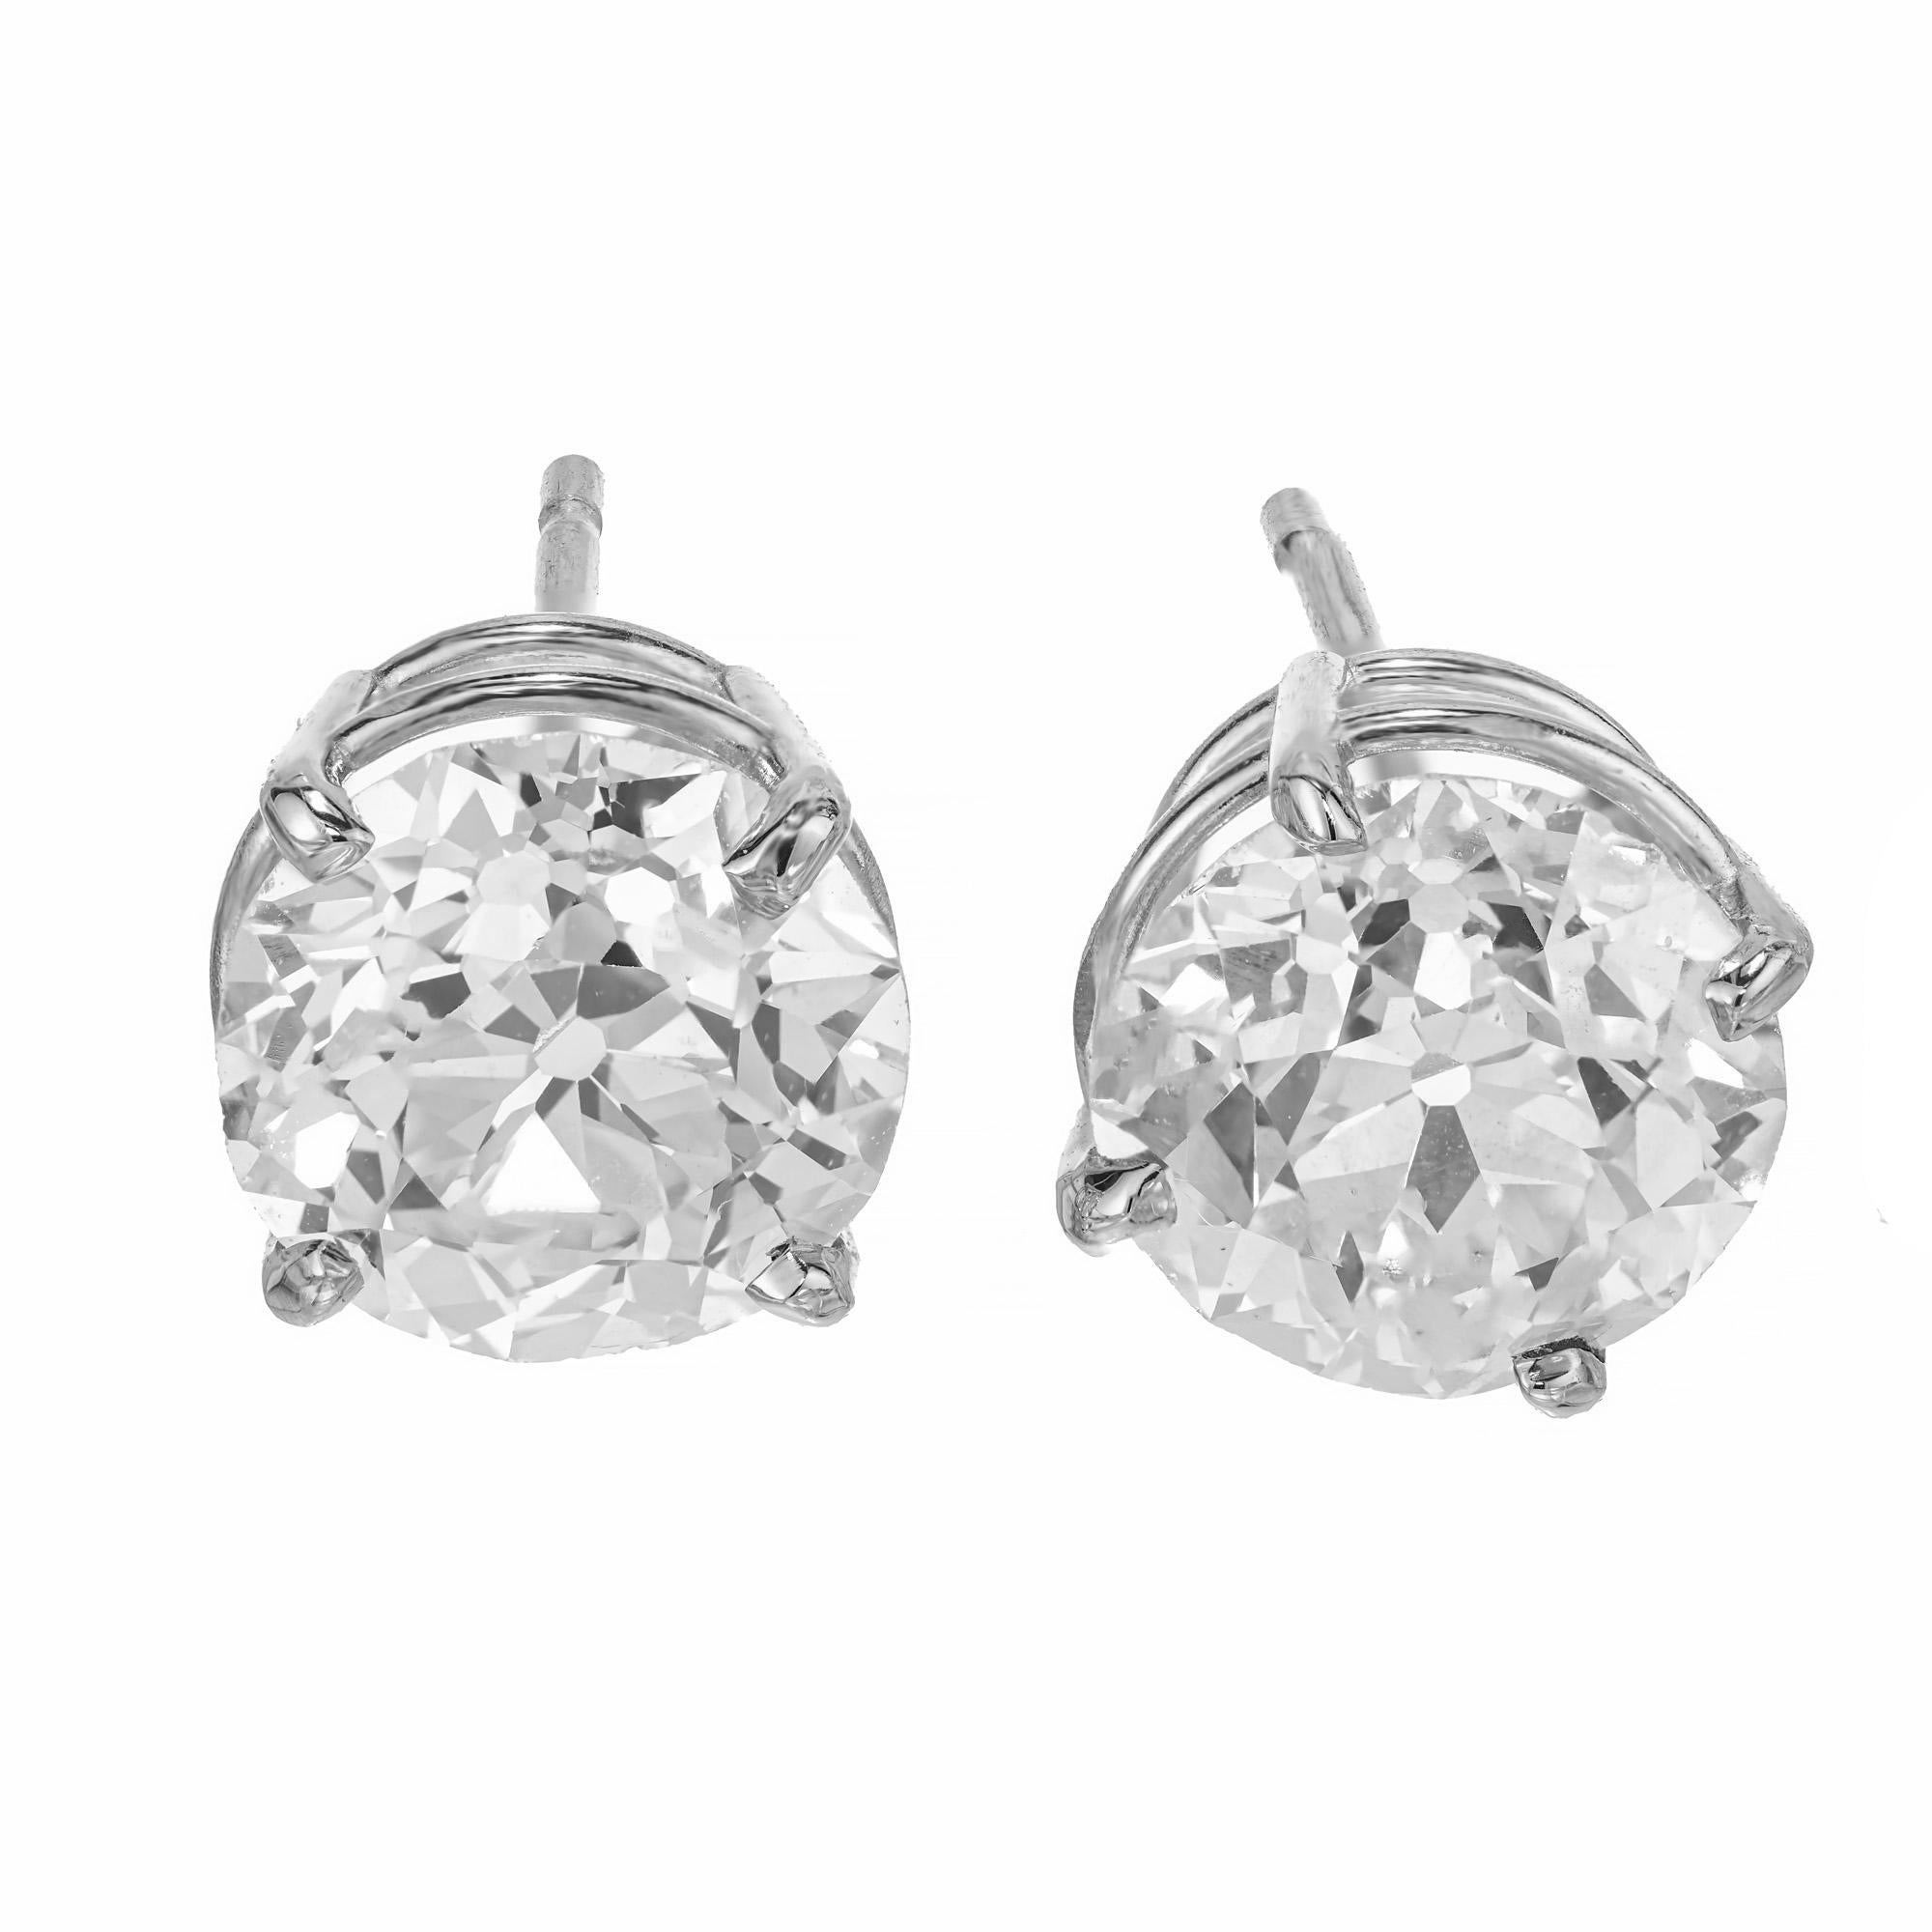 1920's EGL Certified diamond stud earrings. 2 Old European cut diamonds one weighing approximately 1.76cts with the other at 1.75cts. Set in 14k white gold, 4 prong simple baskets settings. These diamonds are well matched with equal brilliance and